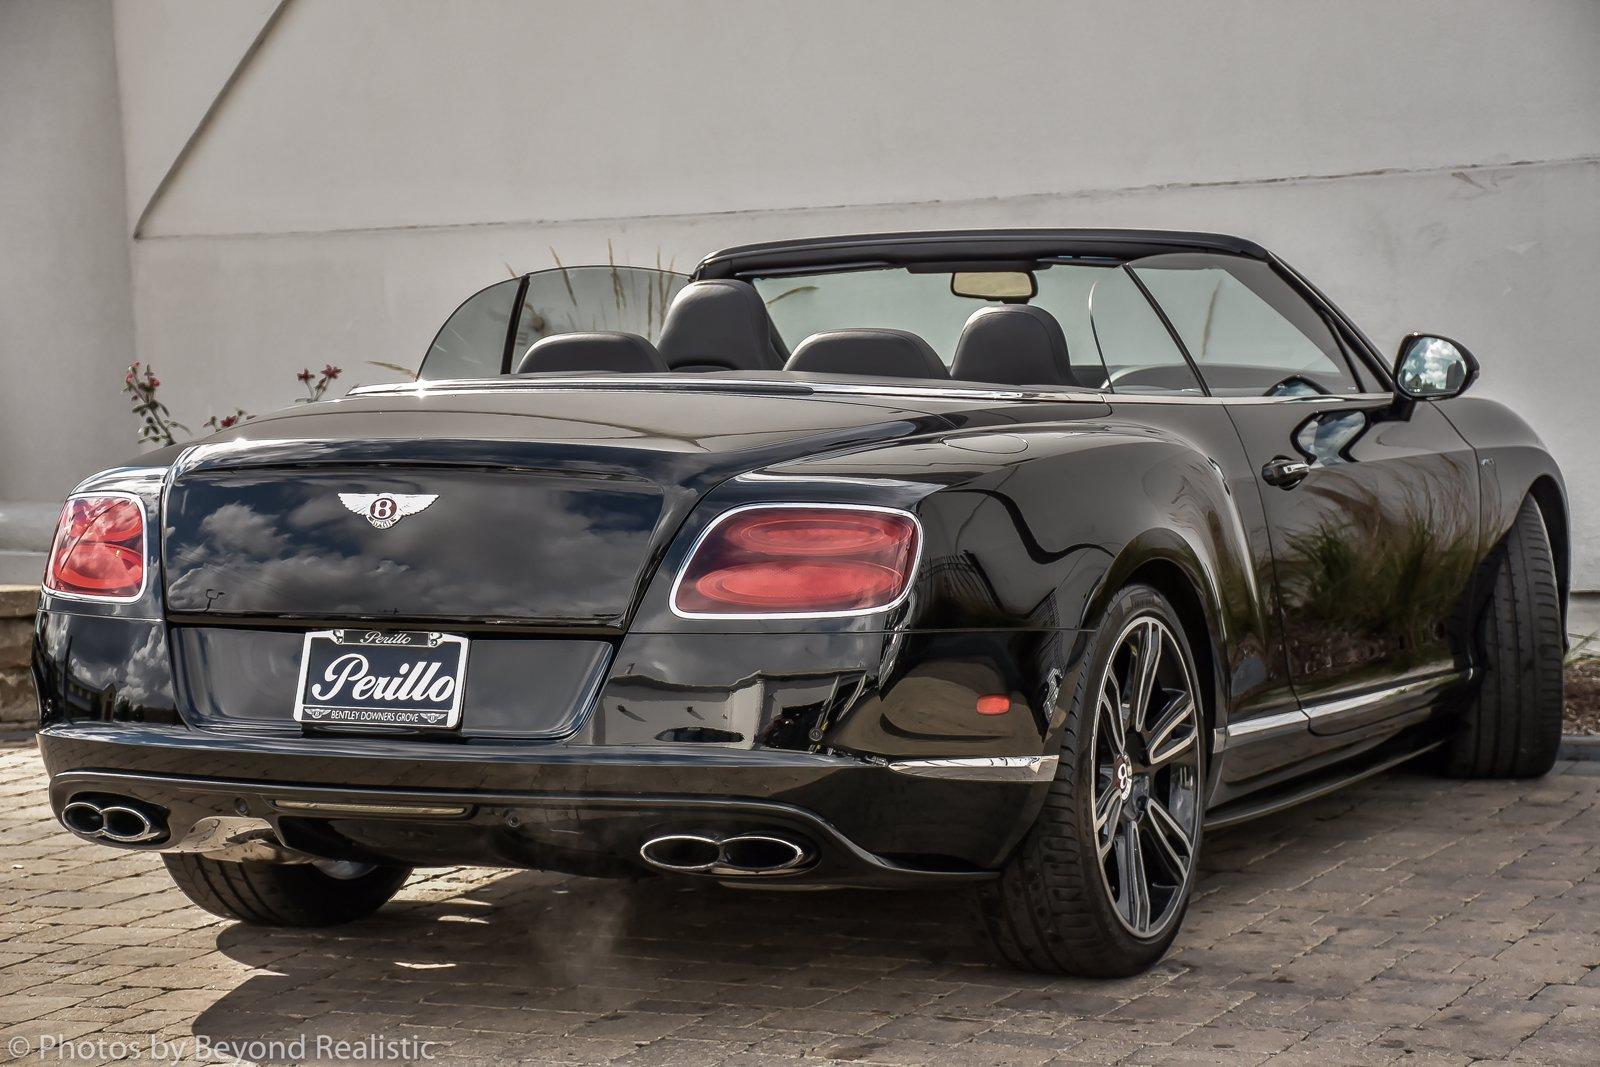 Used 2015 Bentley Continental GT V8 S Mulliner Convertible | Downers Grove, IL